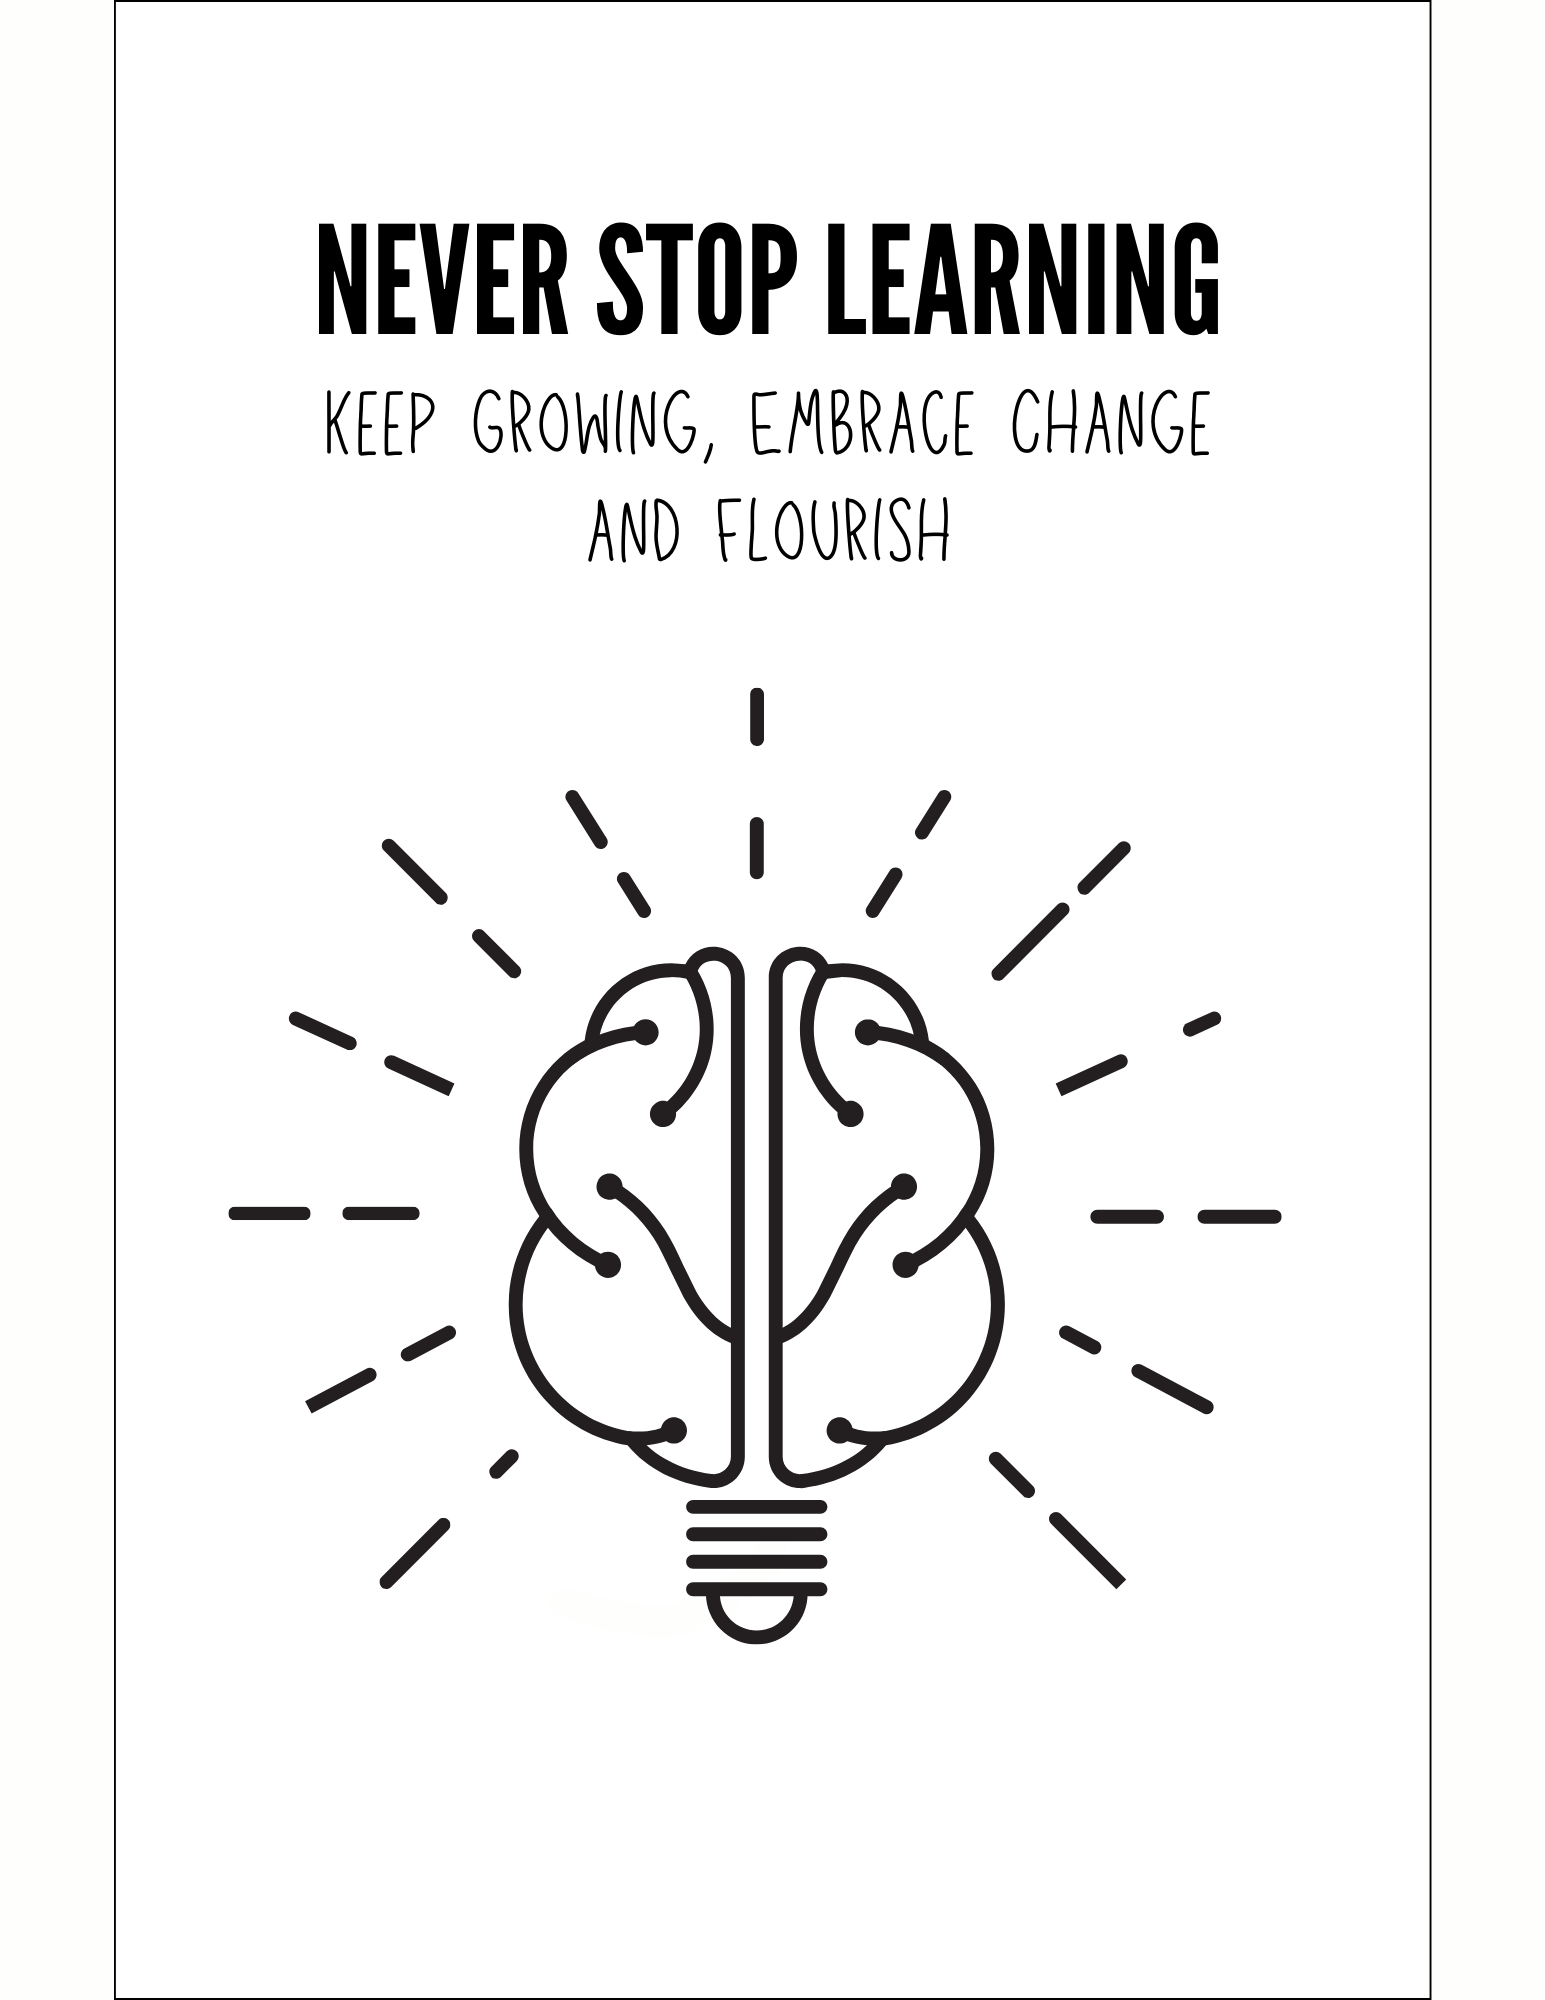 Never-ever-stop-learning